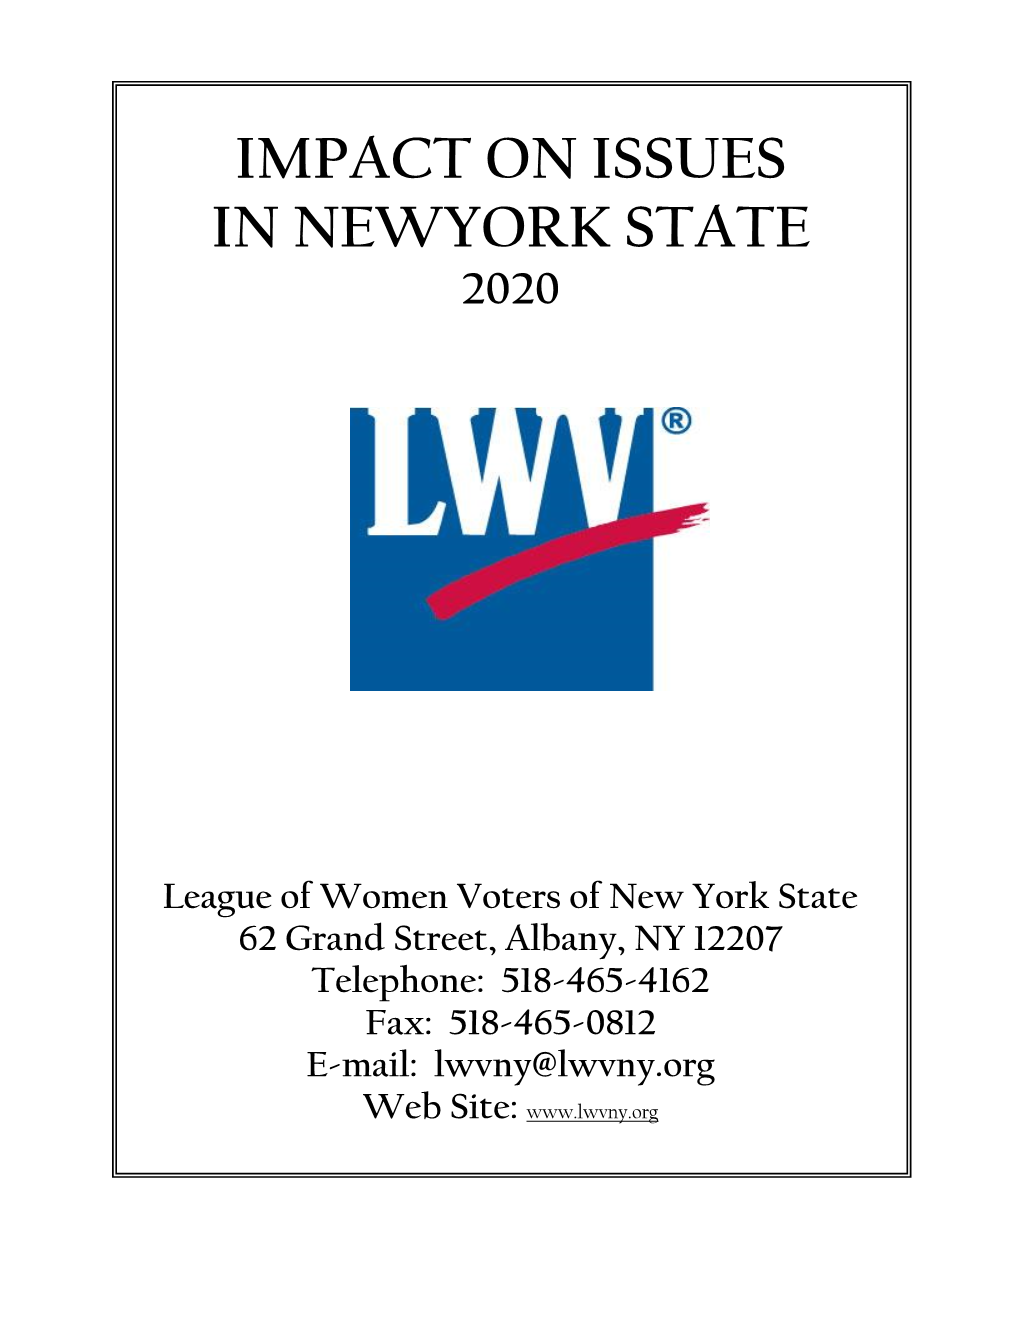 LWVNYS Impact on Issues 2020